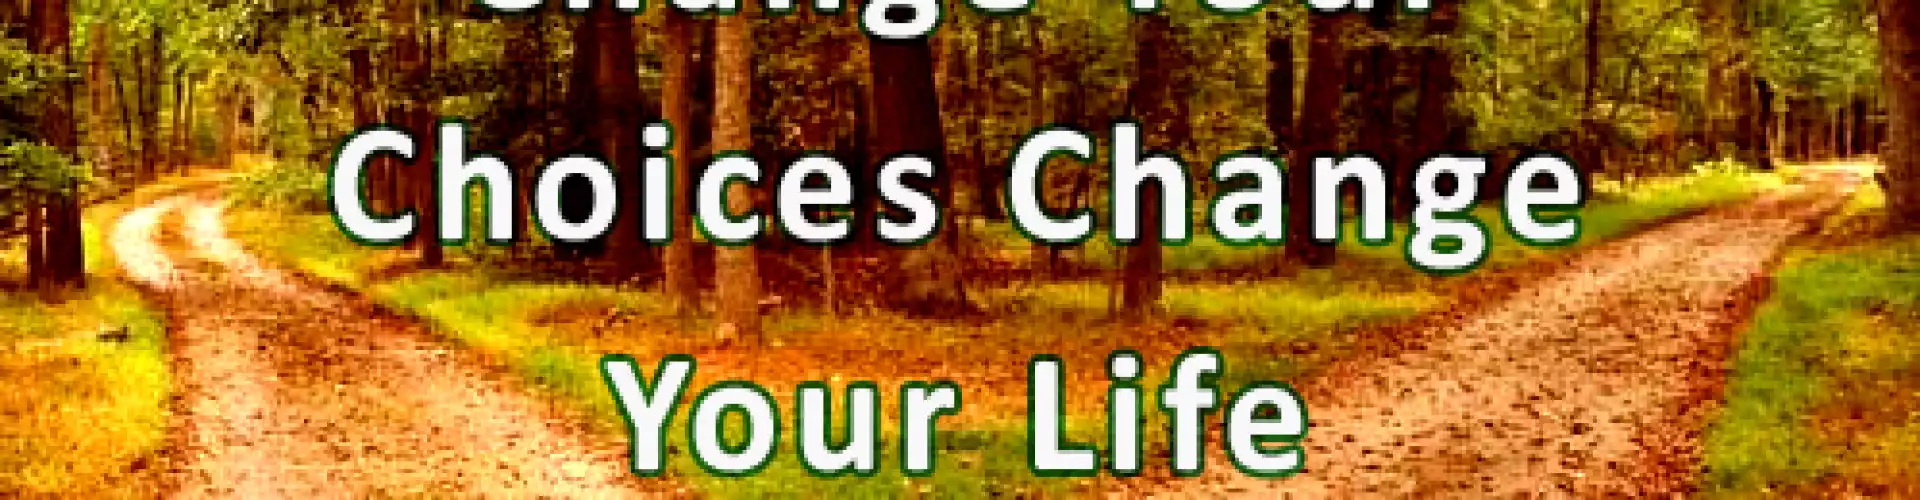 Change Your Choices Change Your Life